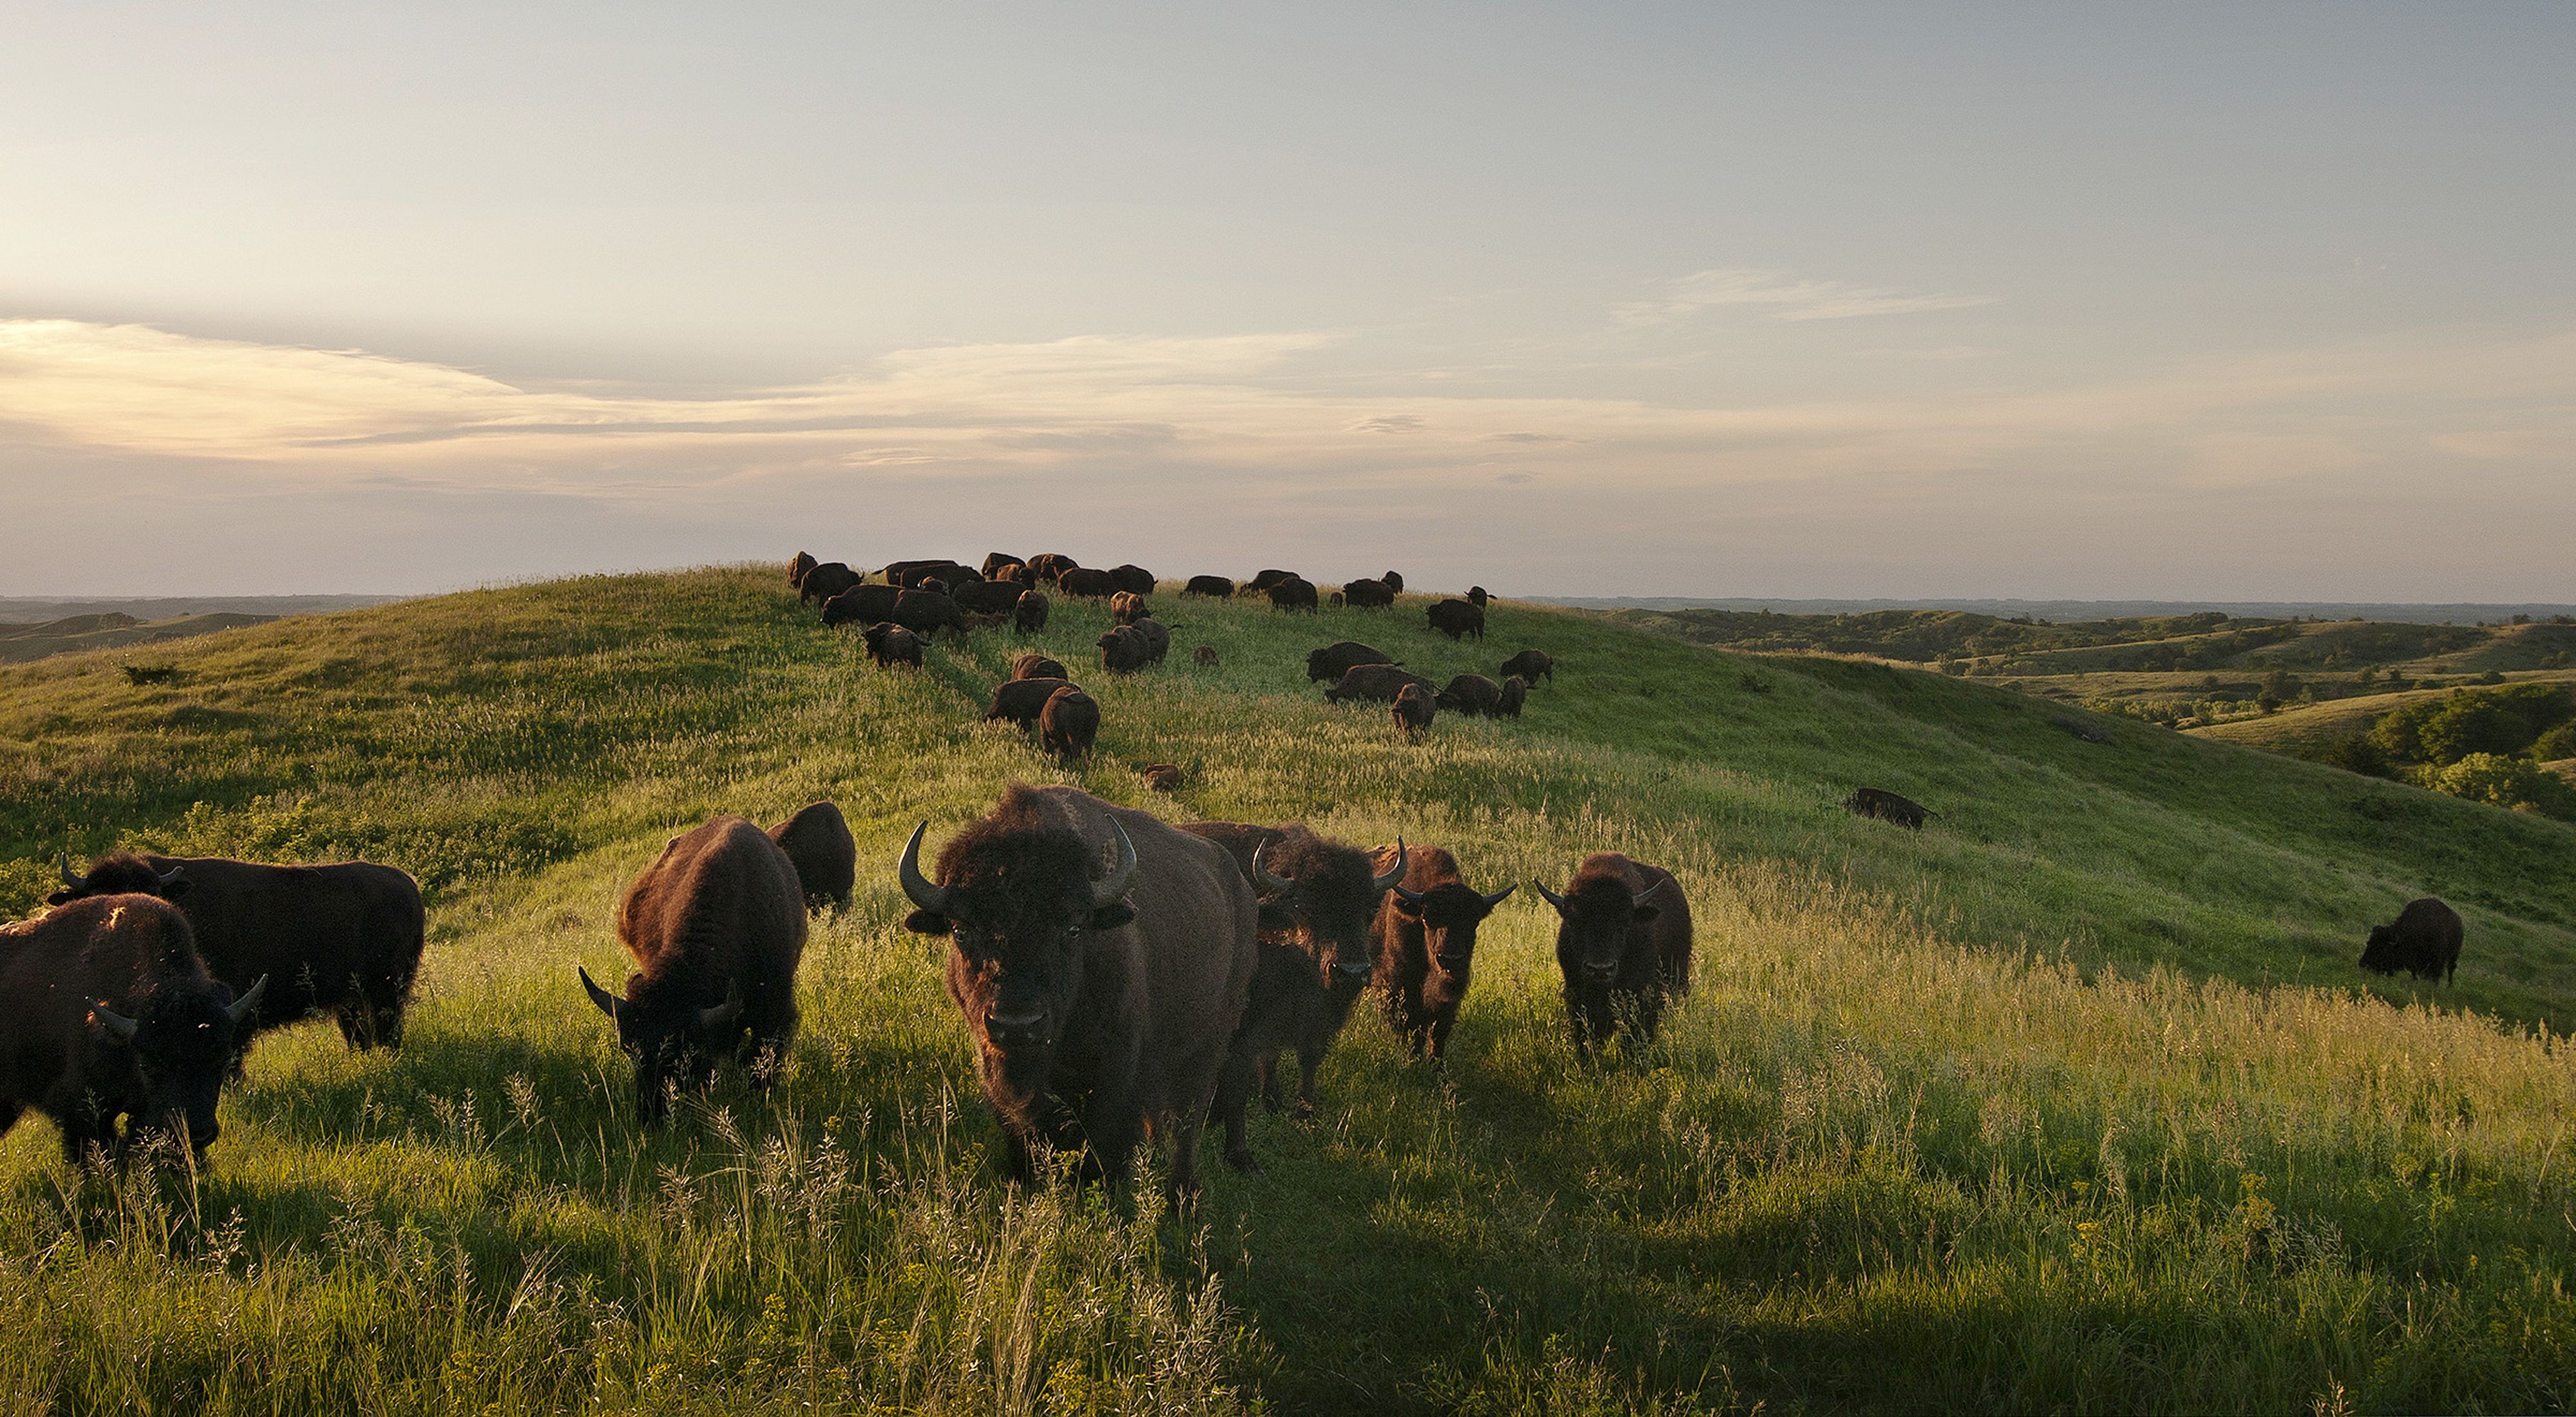 A herd of bison walk across a grassy, hilly landscape toward the camera.